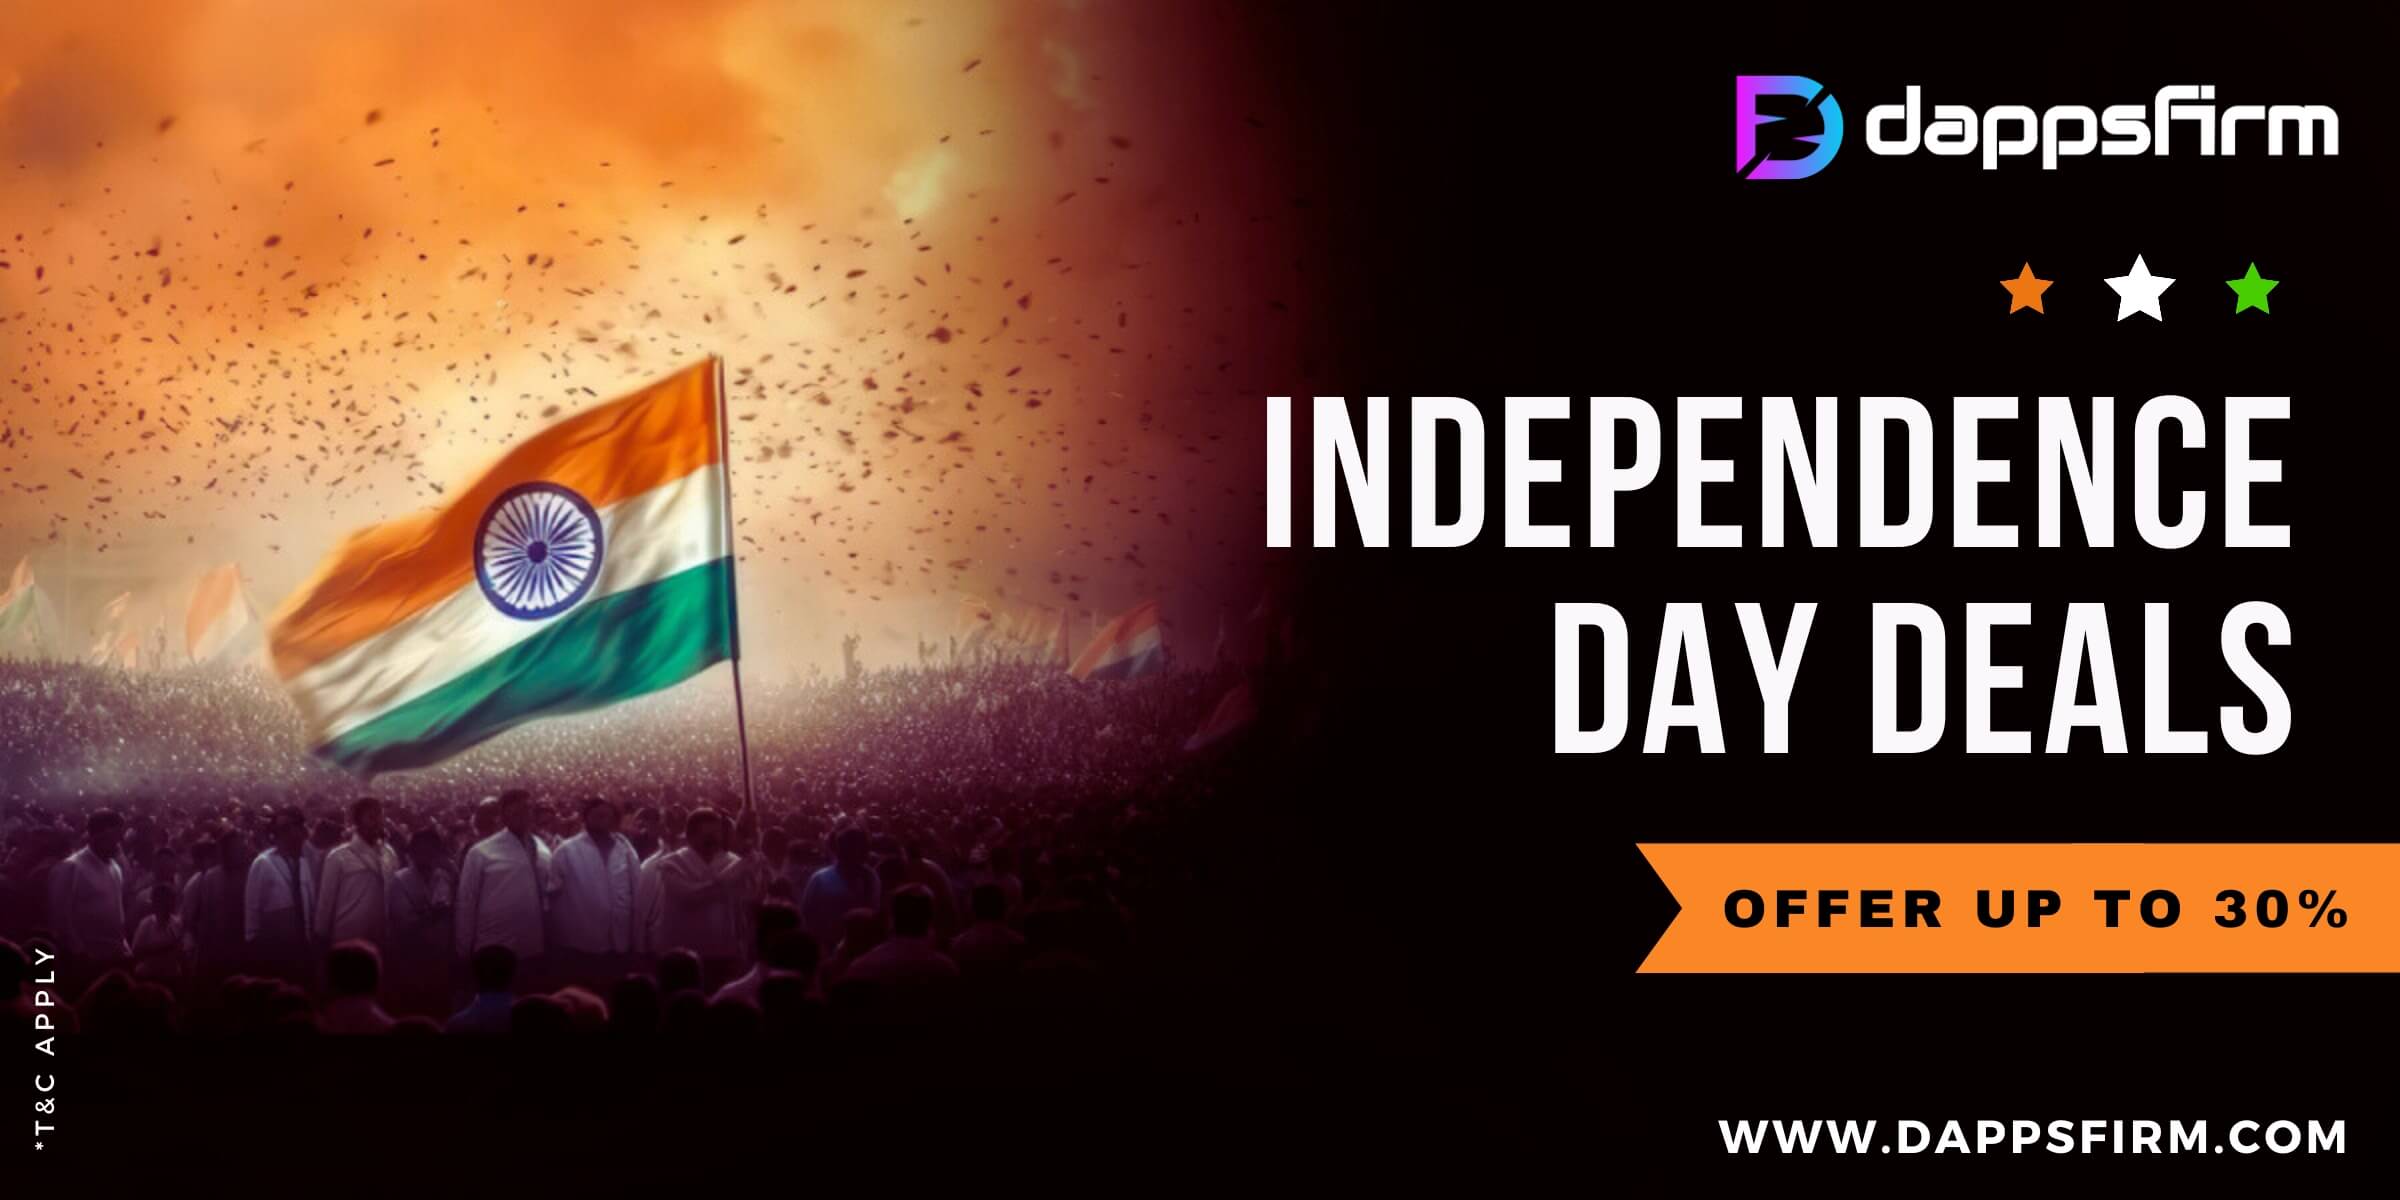 DappsFirm Independence Day deals & offers 2023 - Get Up to 30% OFF